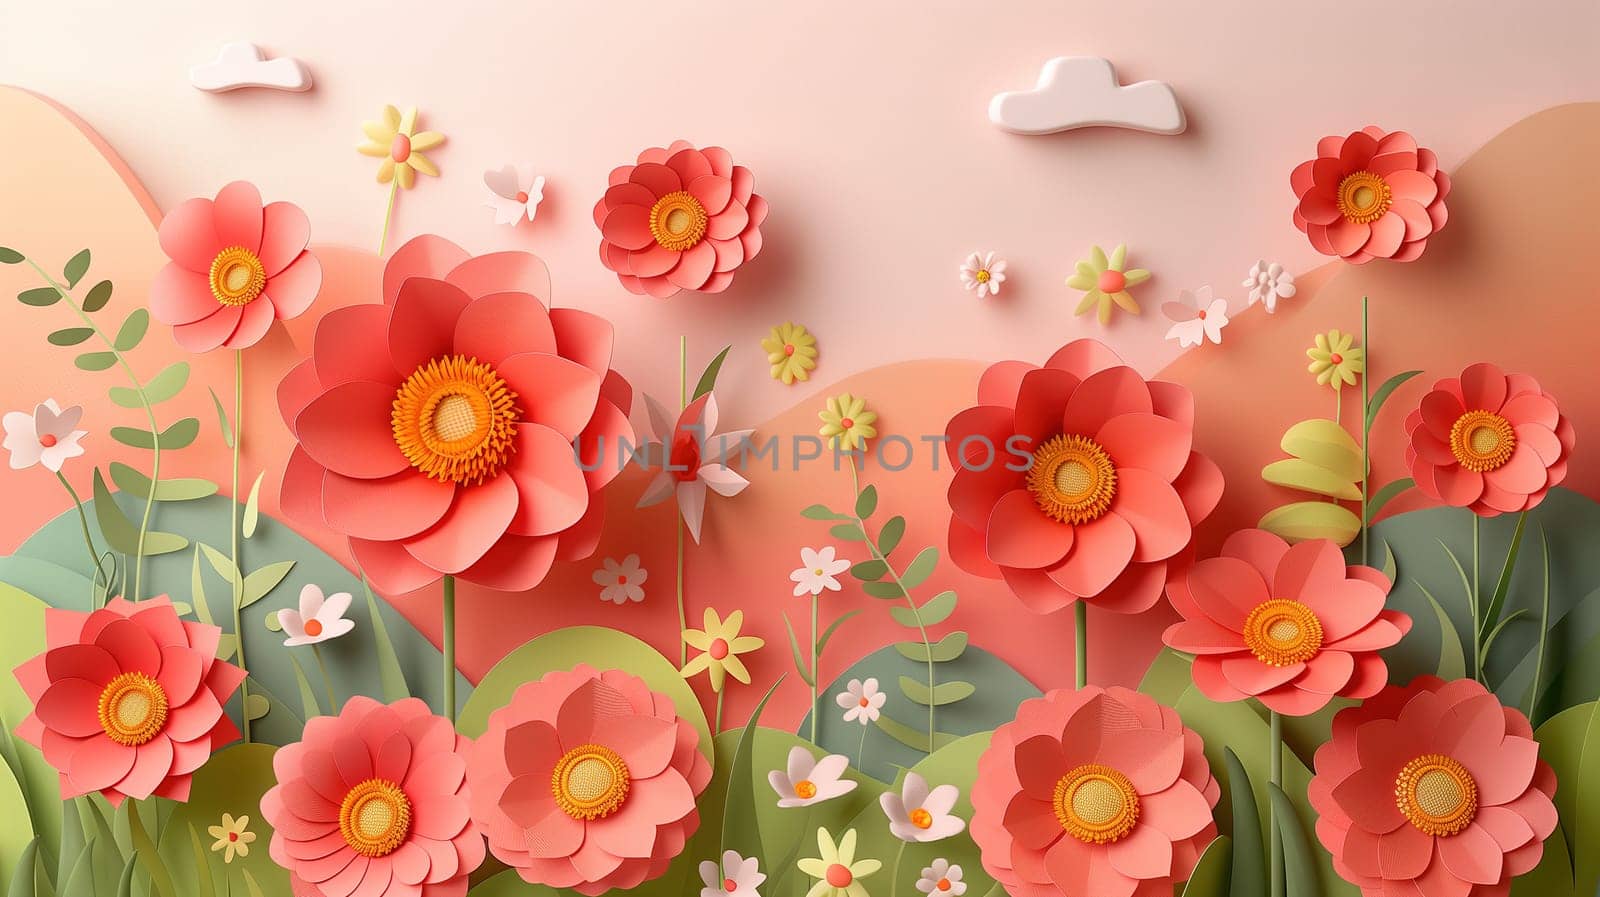 Vibrant Flowers Painting on Pink Wall by TRMK